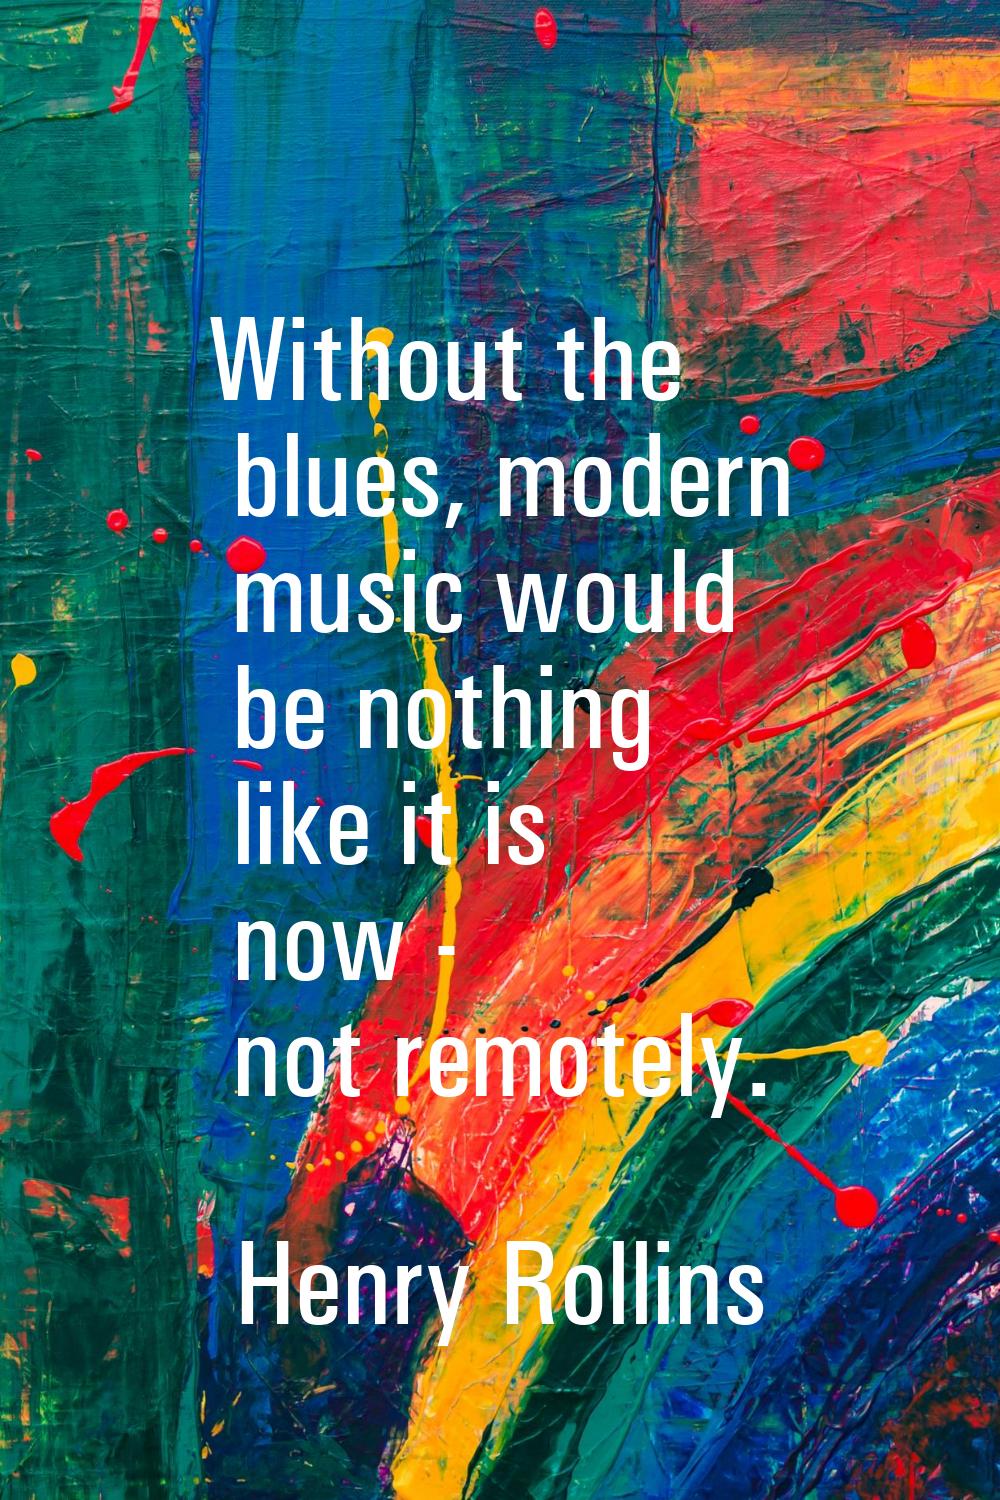 Without the blues, modern music would be nothing like it is now - not remotely.